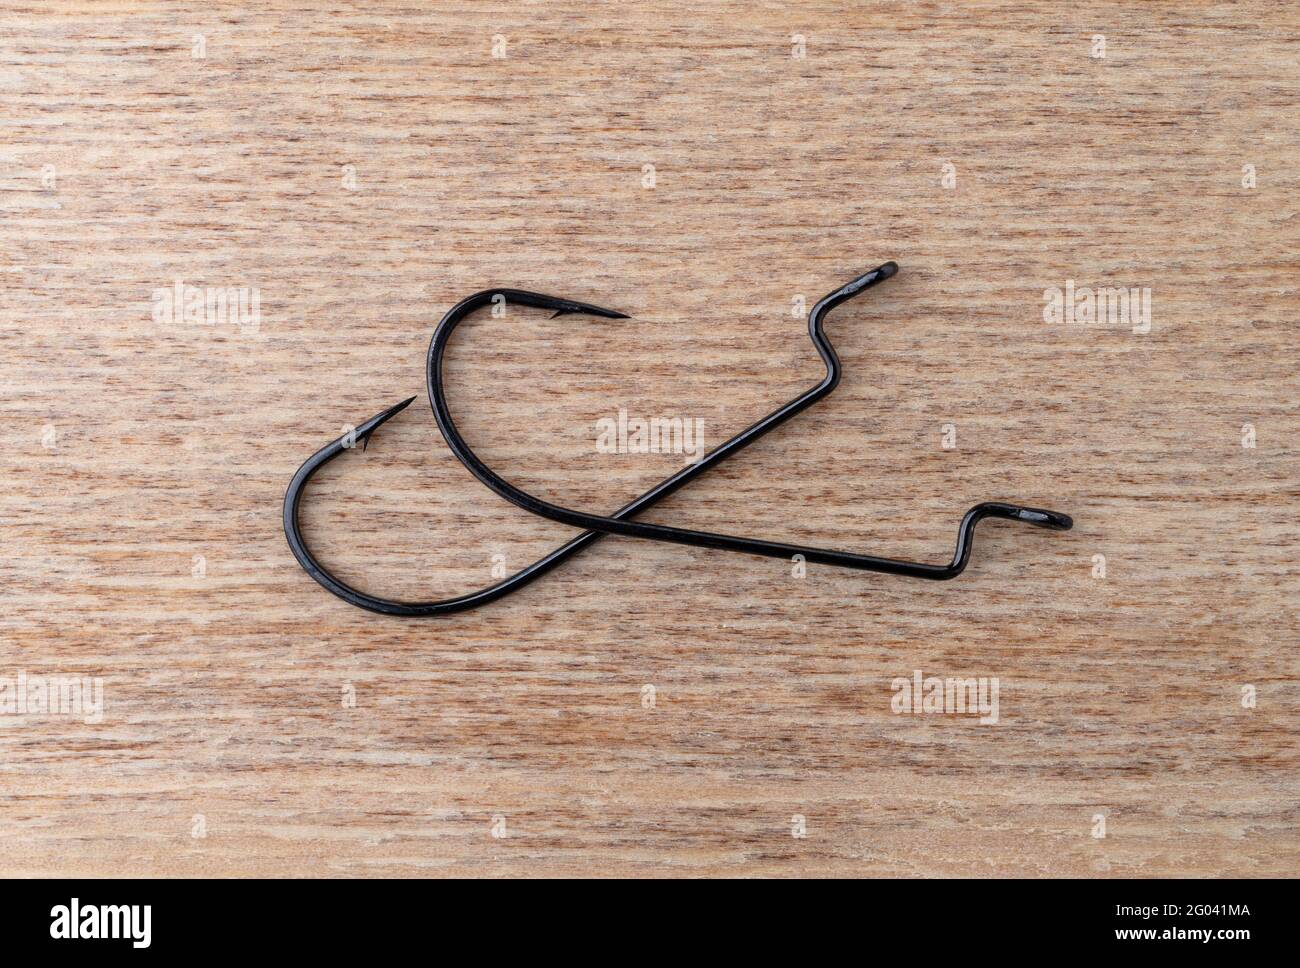 https://c8.alamy.com/comp/2G041MA/top-view-of-two-offset-plastic-worm-bait-hooks-on-a-wood-background-2G041MA.jpg